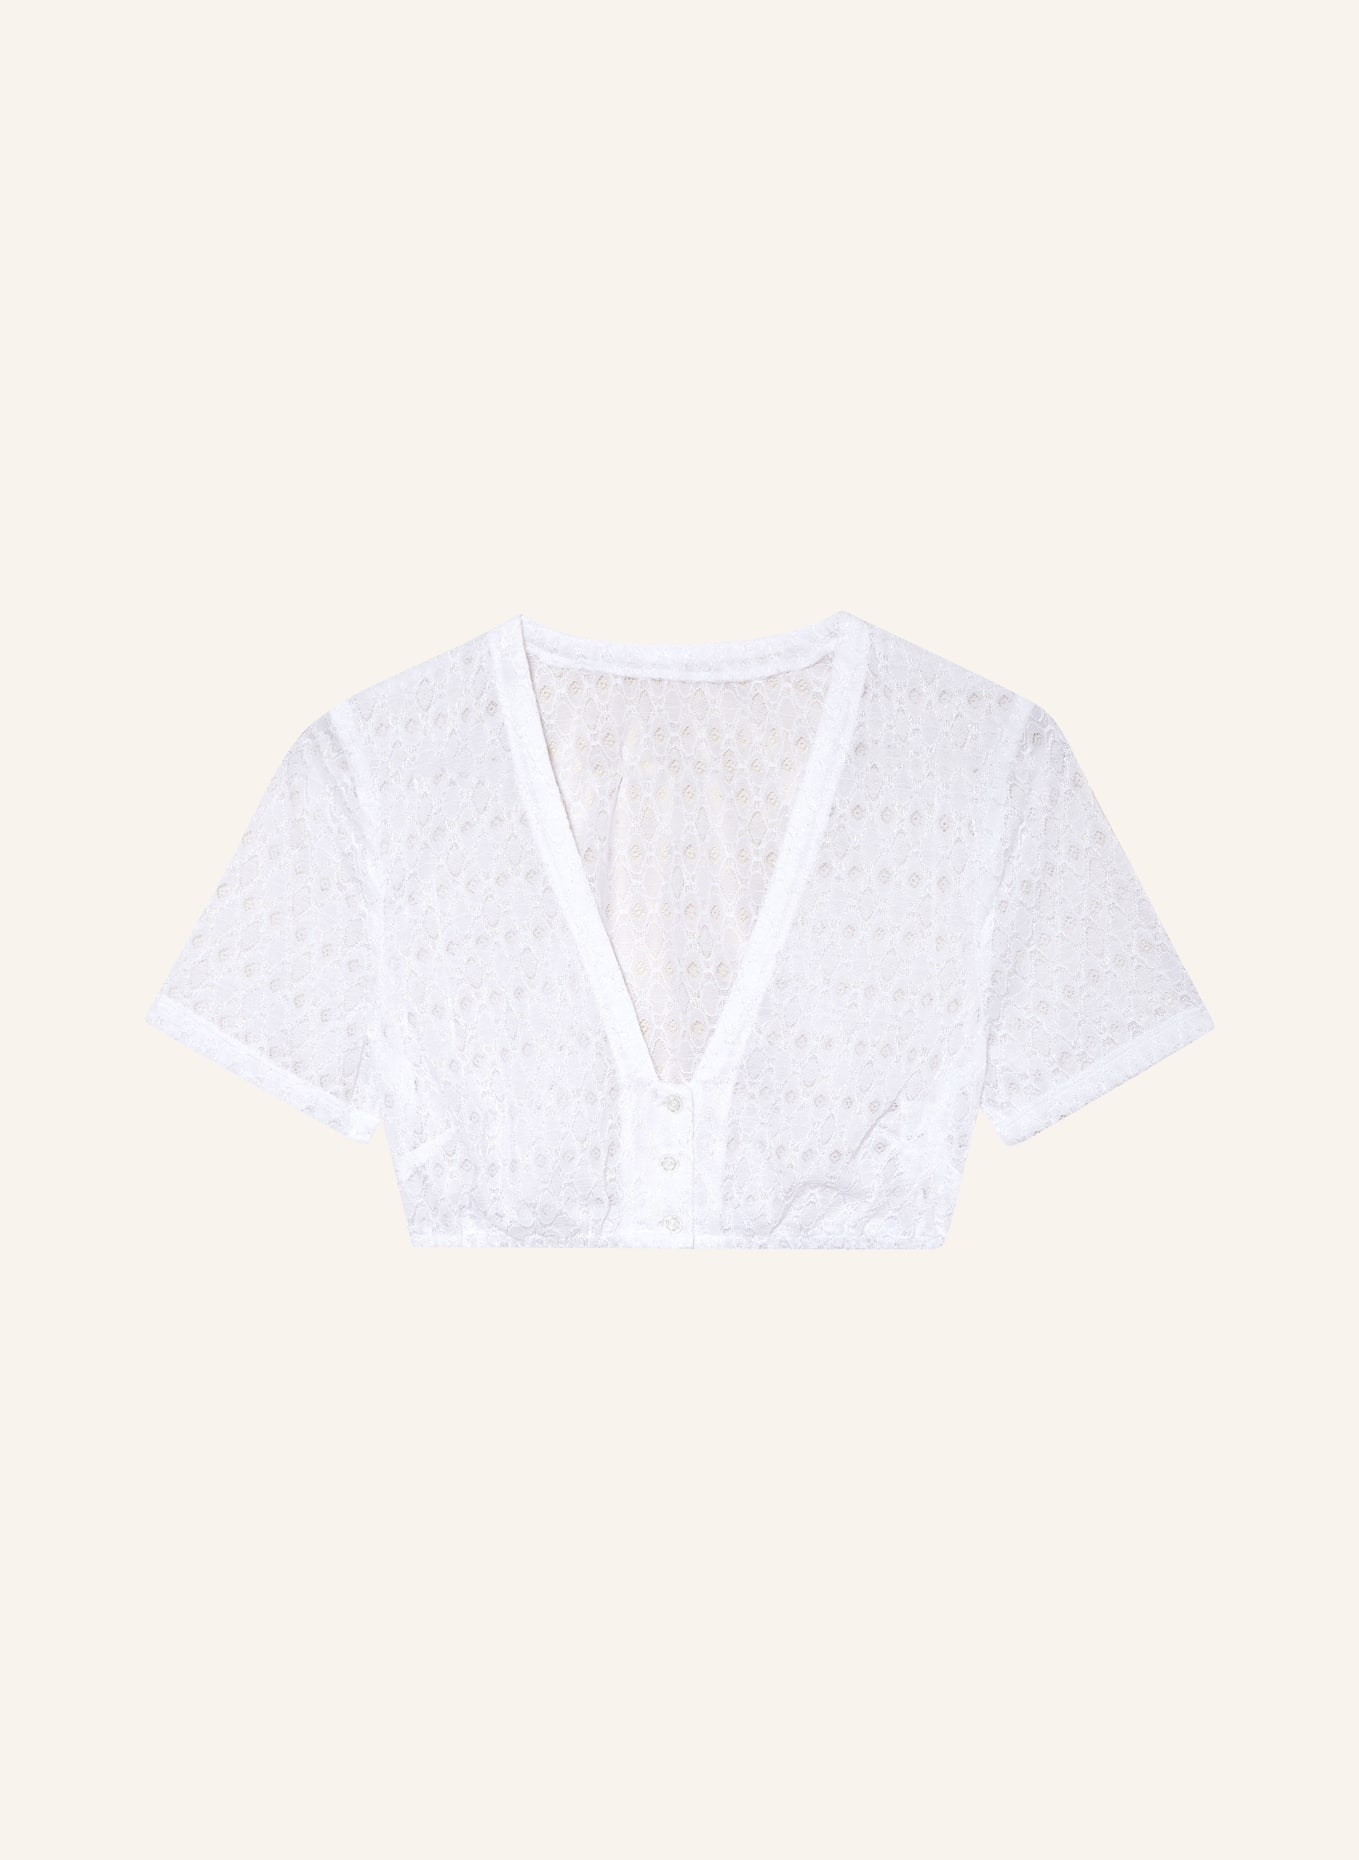 WALDORFF Dirndl blouse made of crochet lace, Color: WHITE (Image 1)